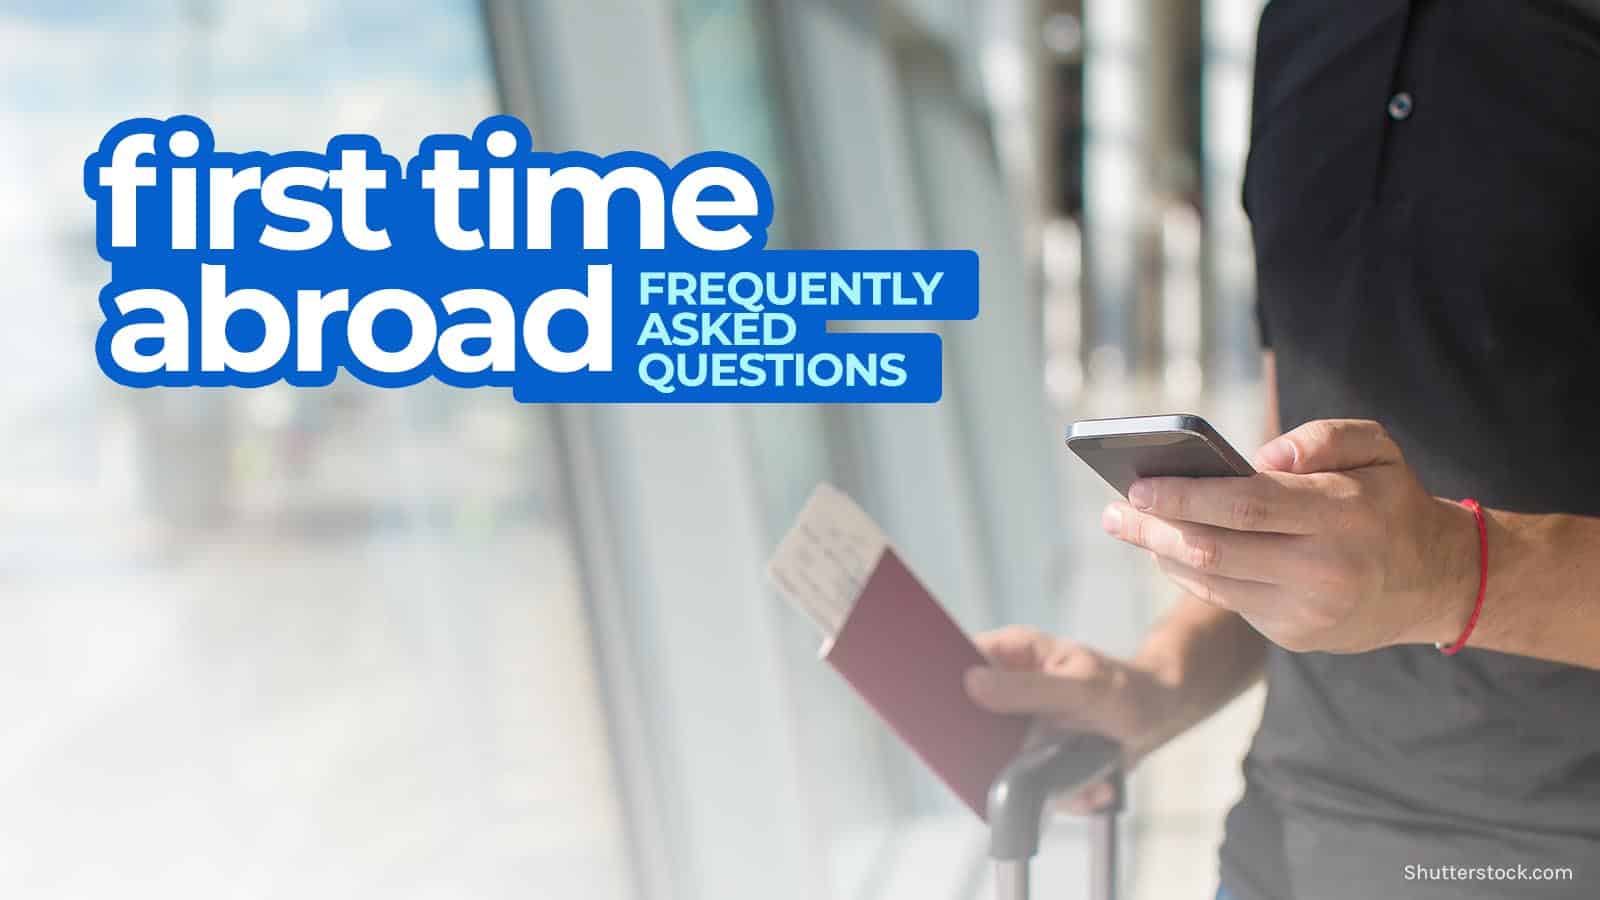 FIRST TIME ABROAD: Airport Tips & Frequently Asked Questions